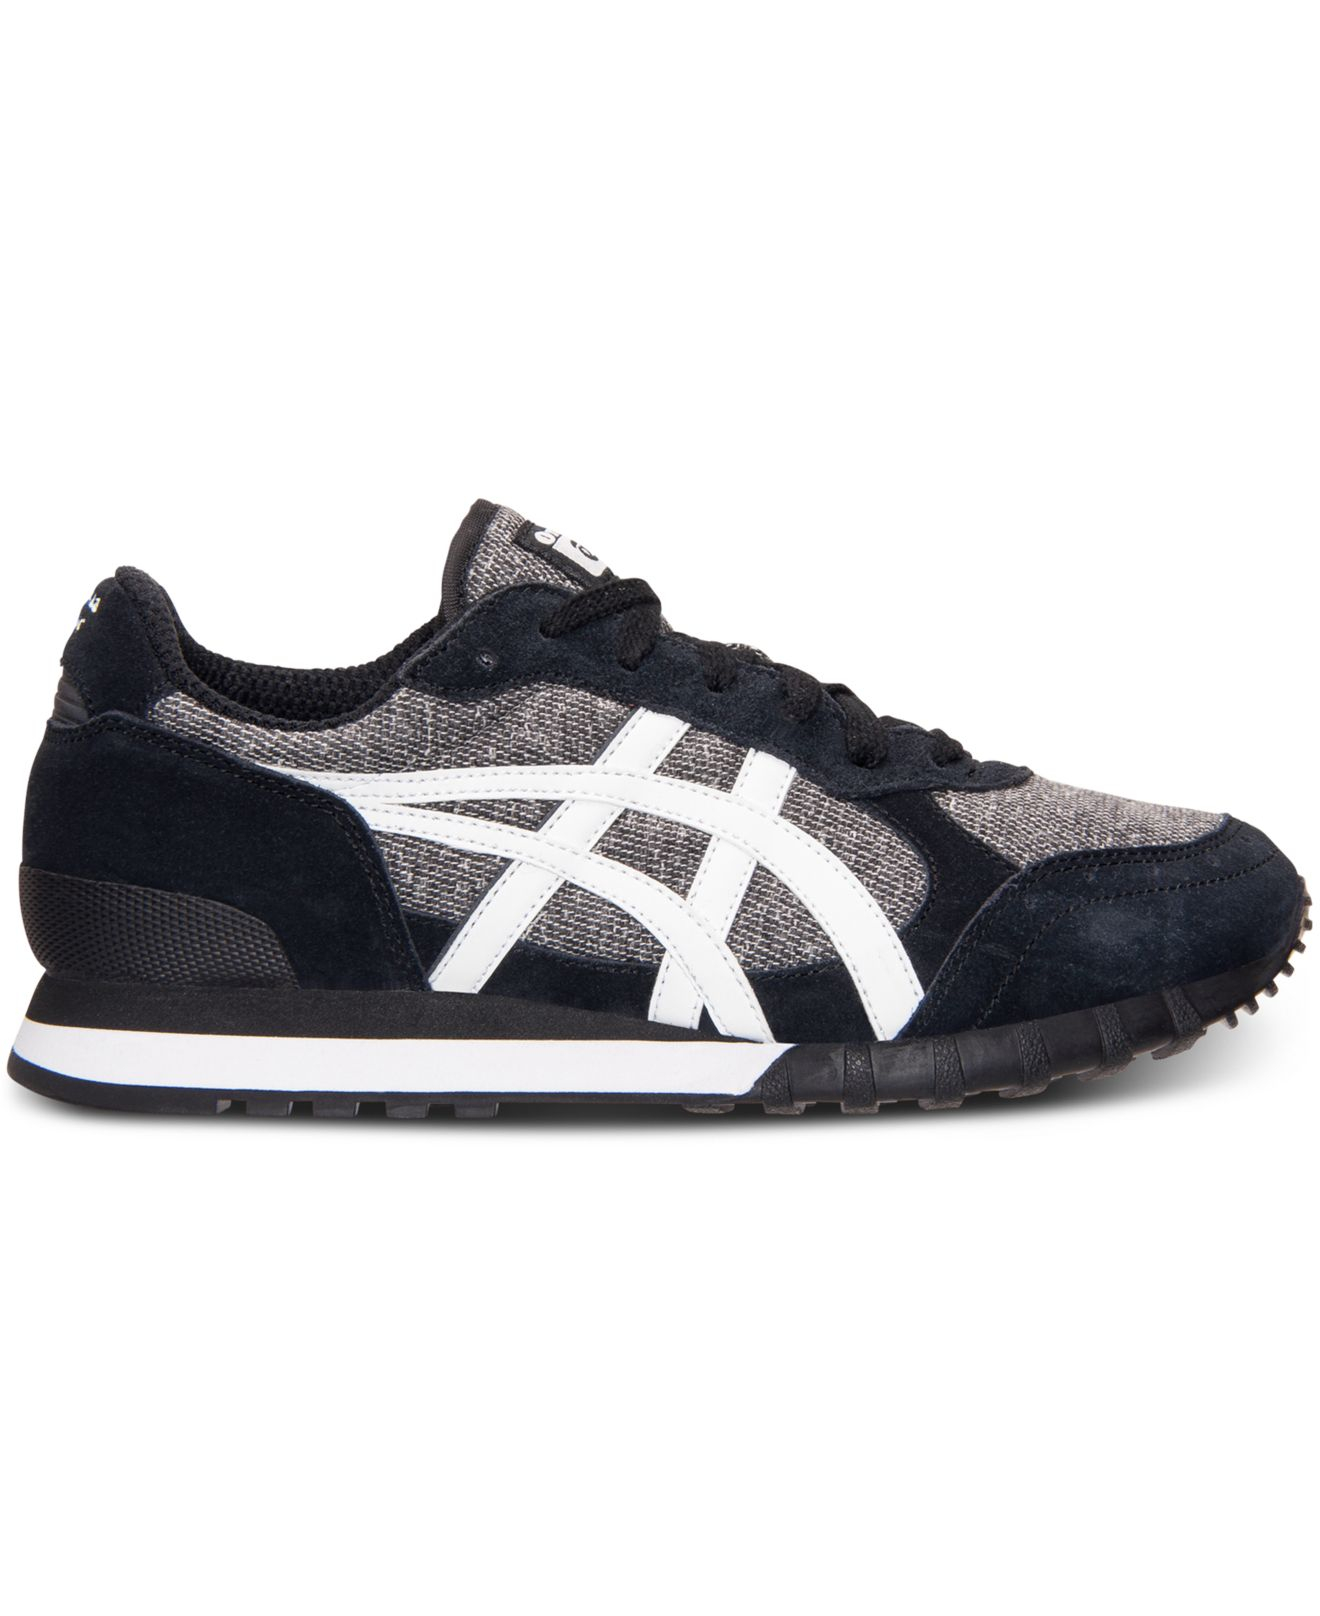 Asics Men'S Onitsuka Tiger Colorado 85 Tweed Casual Sneakers From ...